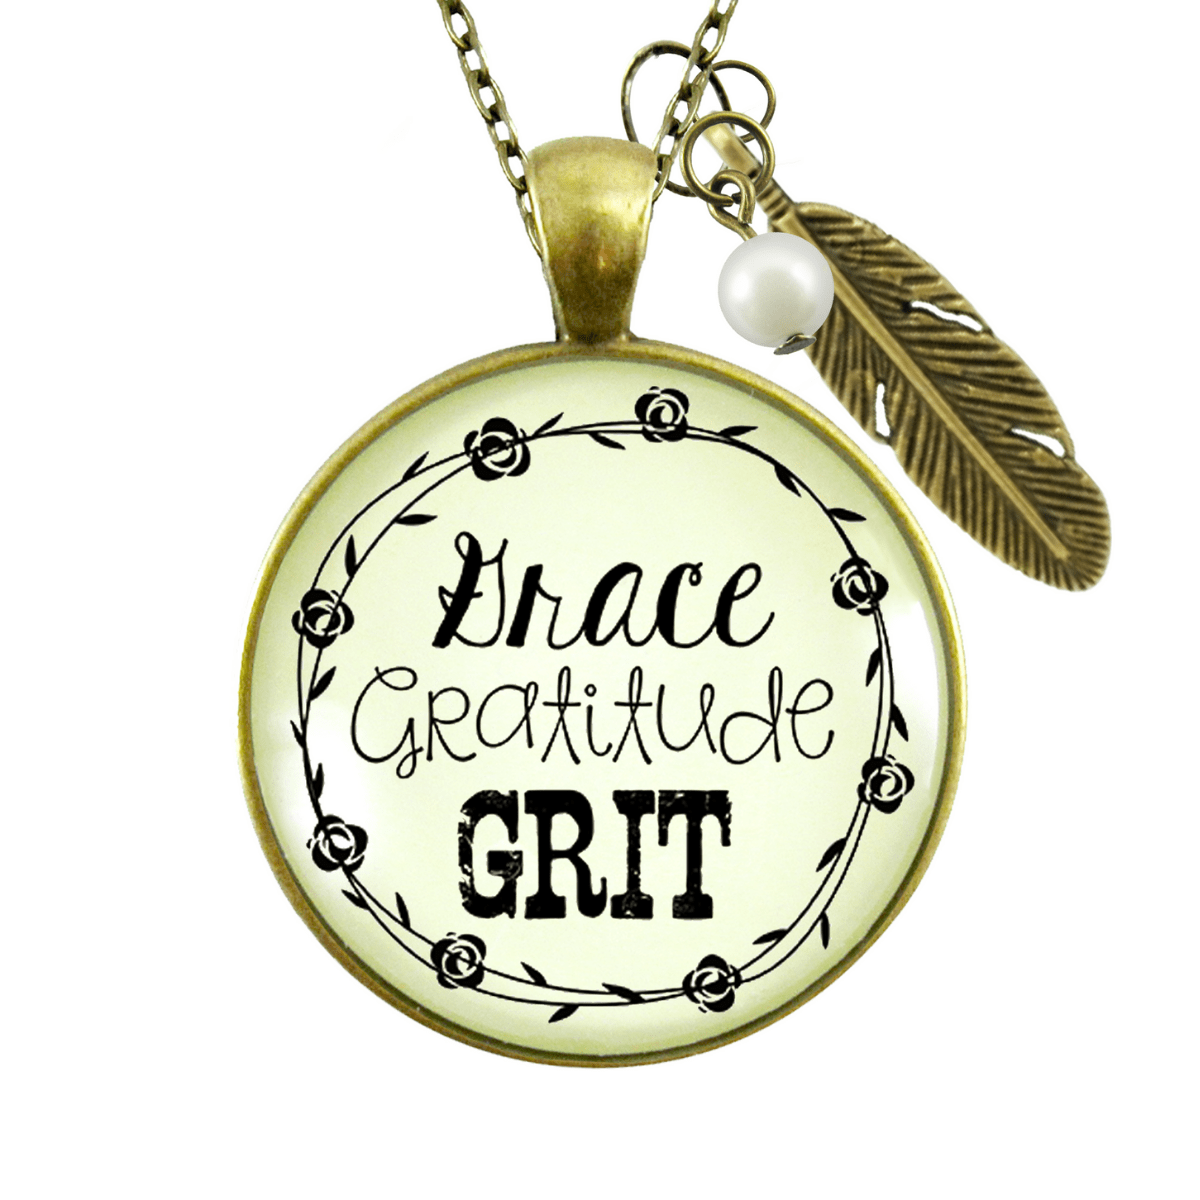 Gutsy Goodness Grace Gratitude Grit Necklace Southern Country Feather Charm - Gutsy Goodness Handmade Jewelry;Grace Gratitude Grit Necklace Southern Country Feather Charm - Gutsy Goodness Handmade Jewelry Gifts